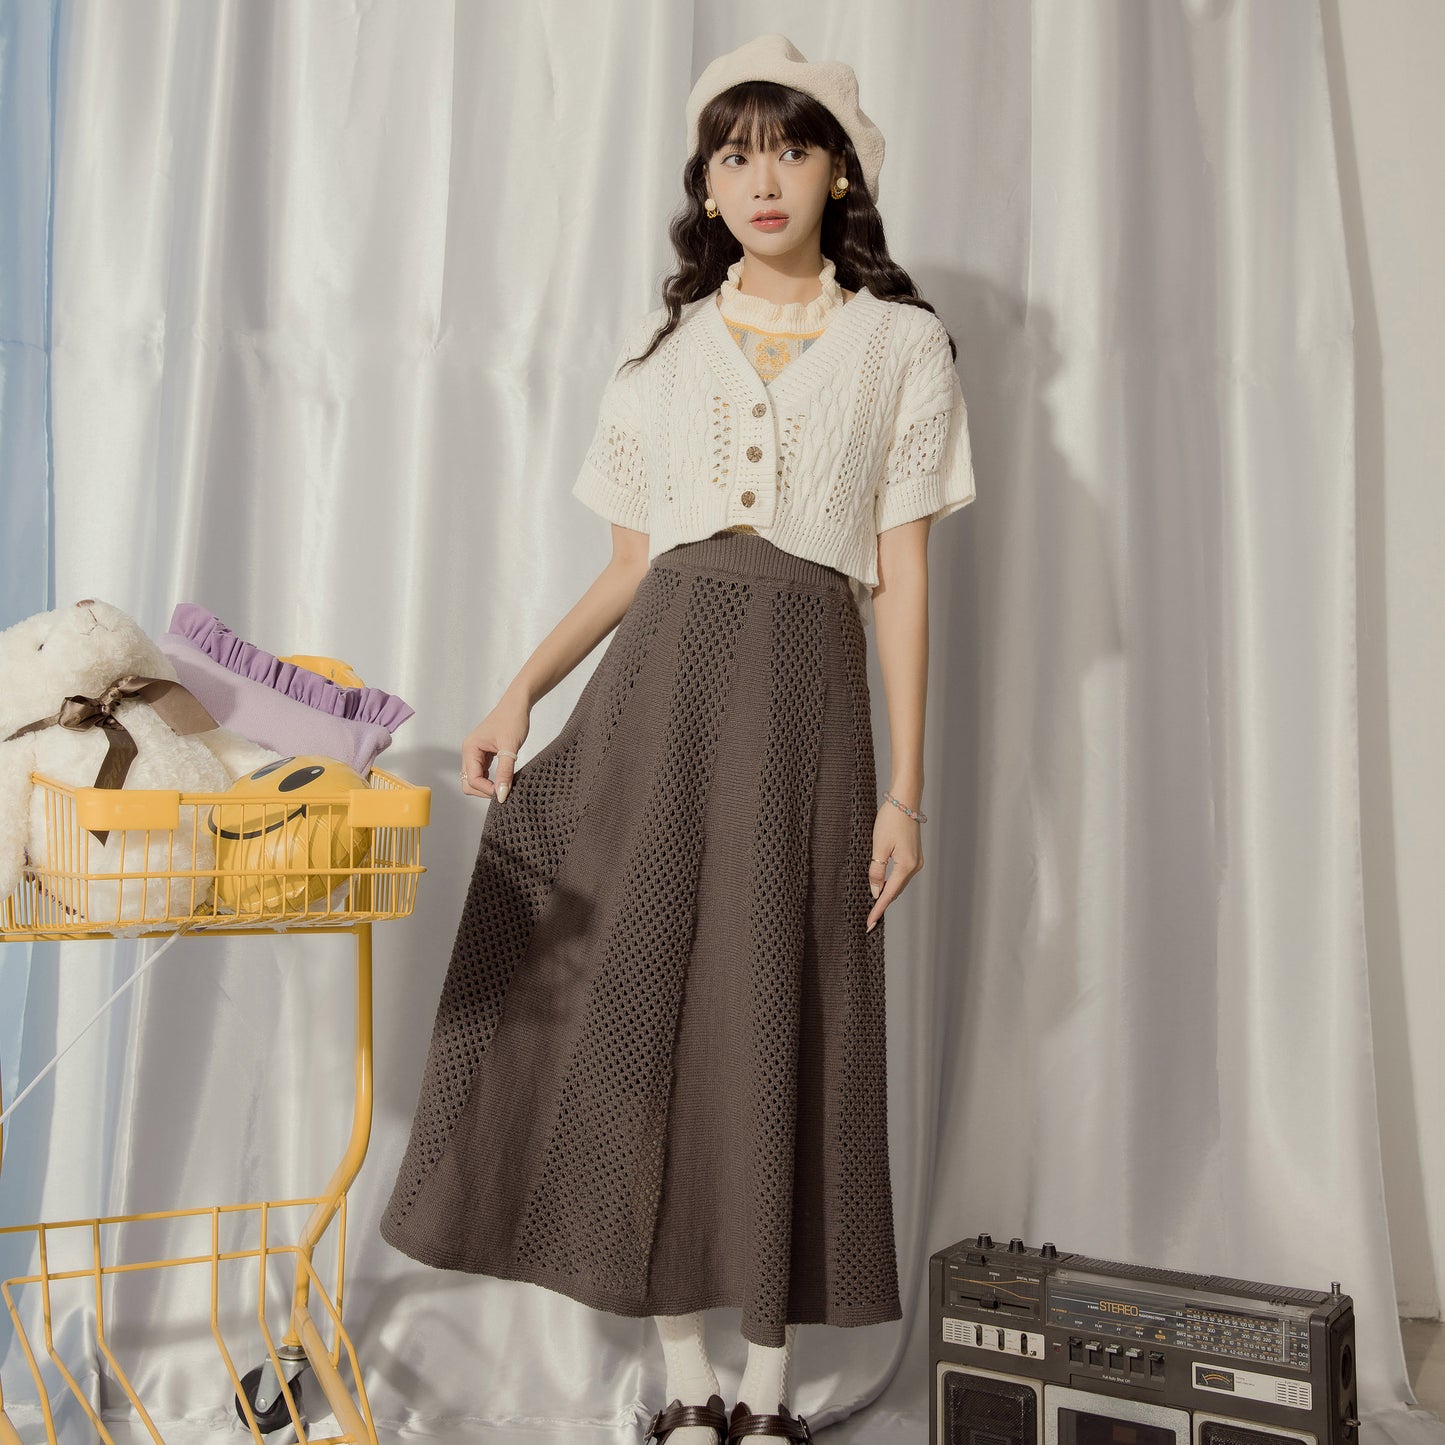 At The Venue | Knit A- Line Skirt